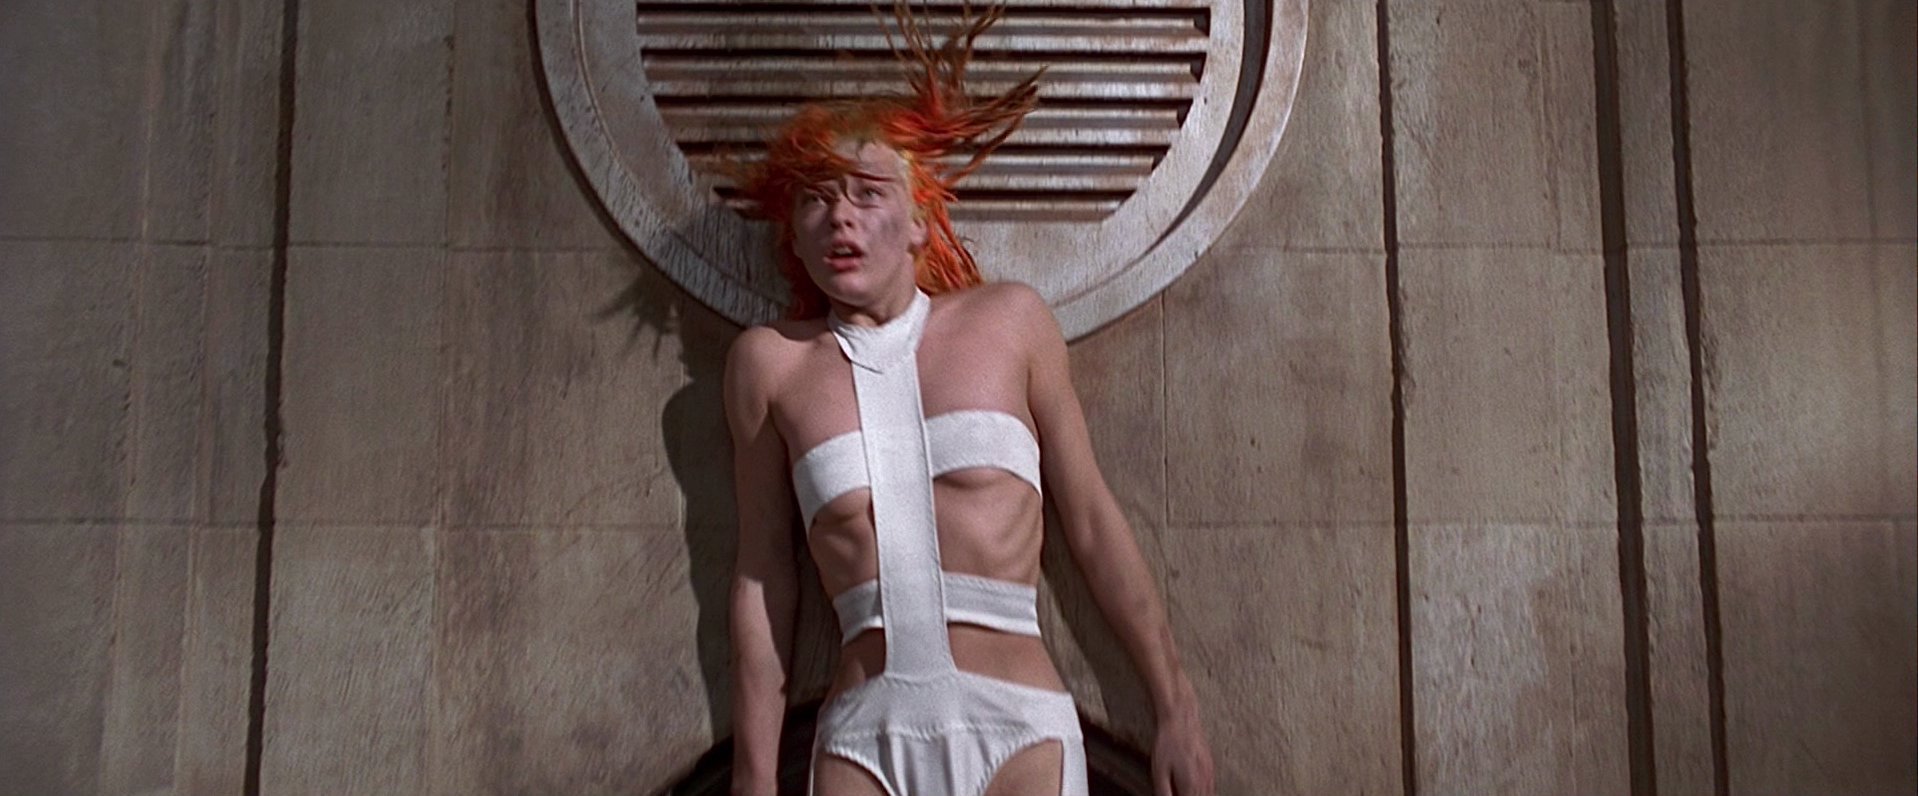 the fifth element, images, image, wallpaper, photos, photo, photograph, gal...